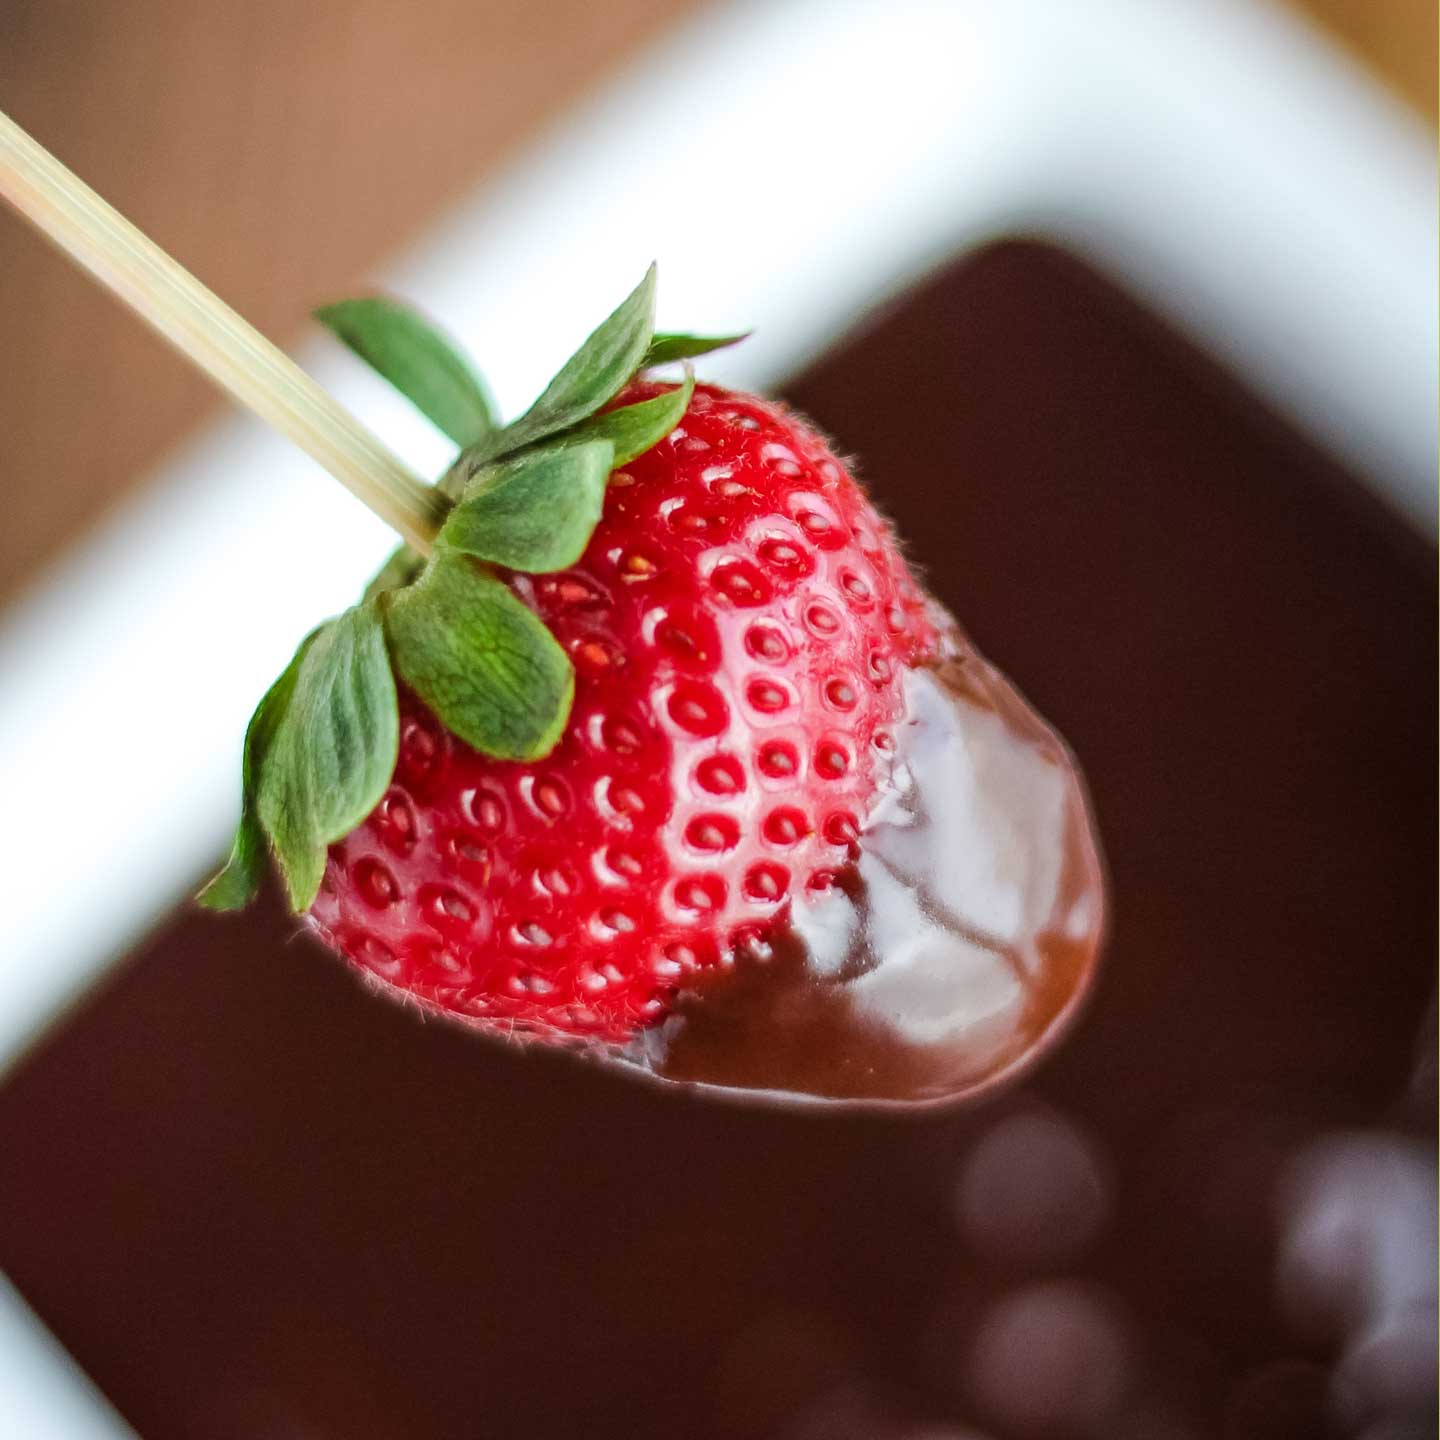 closeup of fresh strawberry on a skewer, that's been partially dipped into the Chocolate Dip bowl below